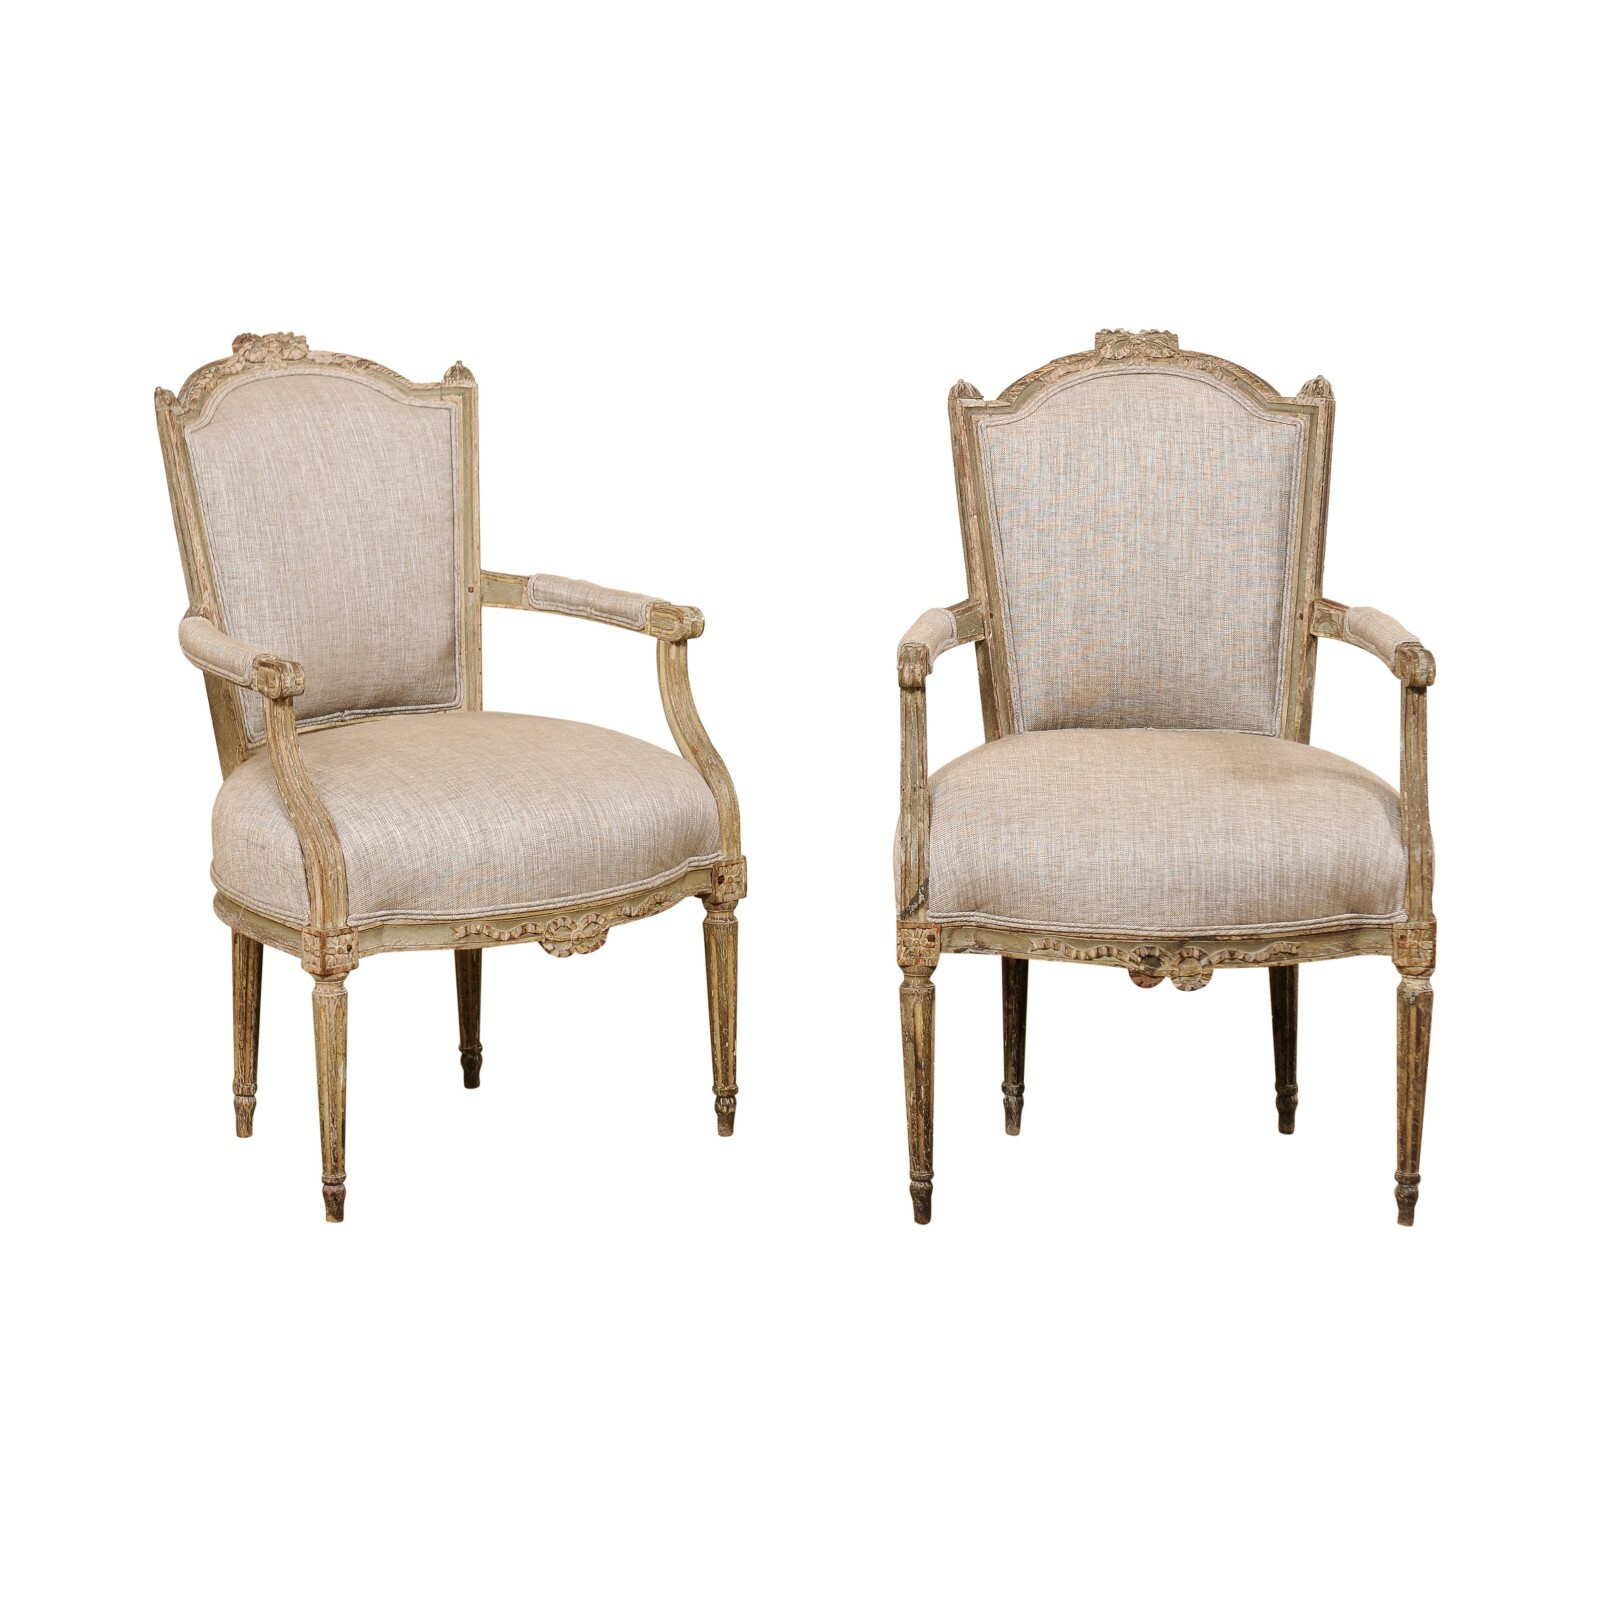 French Louis XVI Style Armchairs, 19th C.